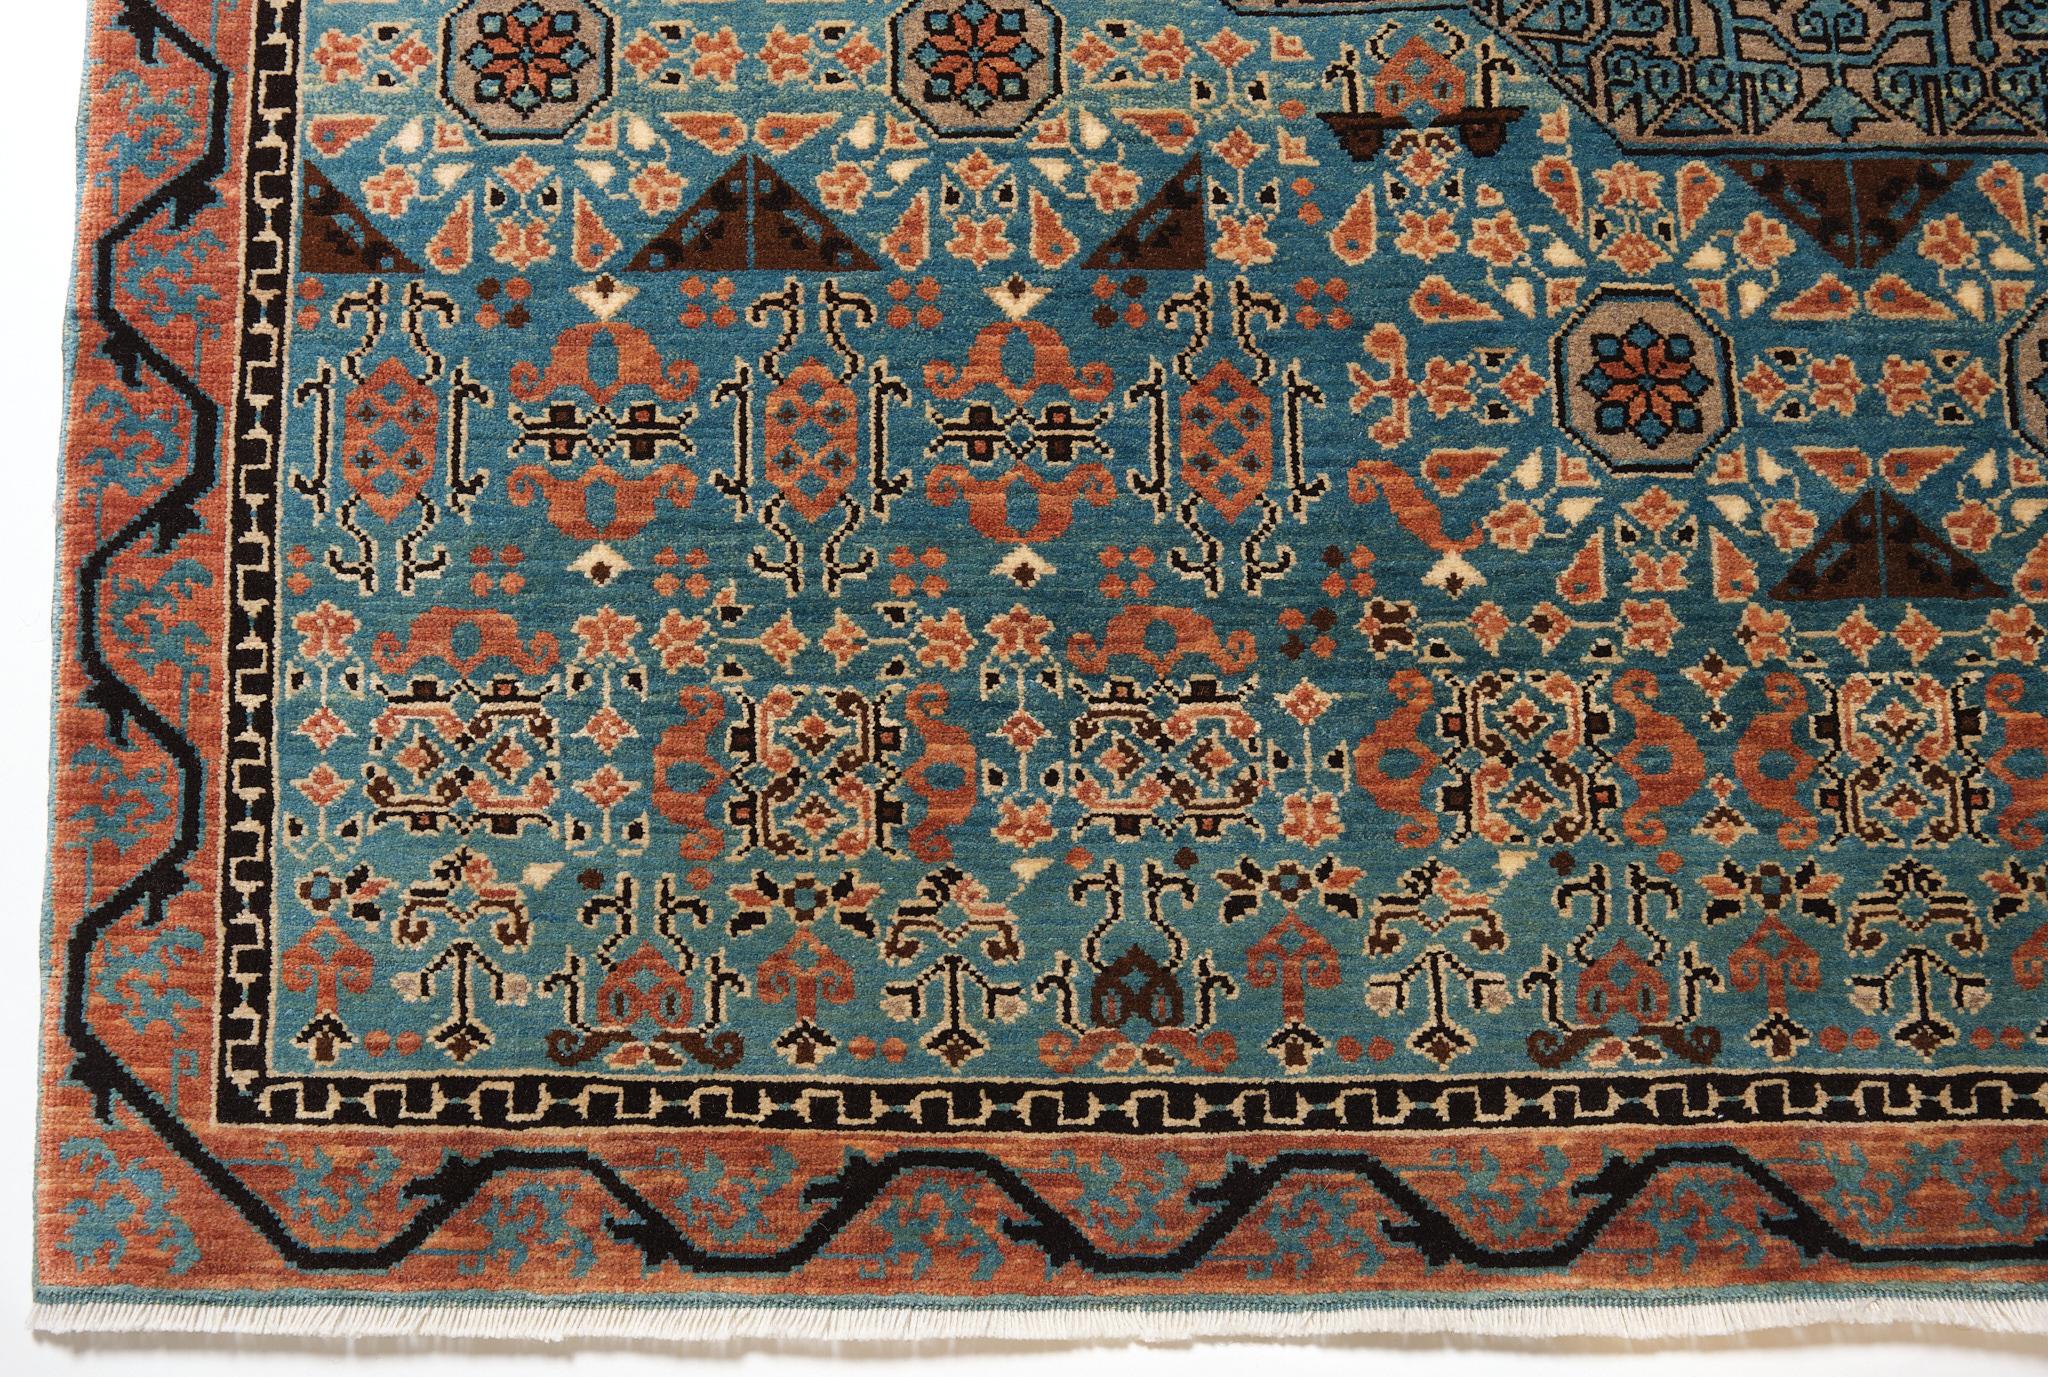 The source of rug comes from the David Collection, Copenhagen. This rug with the Cusped Medallion was designed in the early 16th-century rug by Mamluk Sultane of Cairo, Egypt. Once in the Hirth Collection, and later with Ulrich Schürmann in 1965,